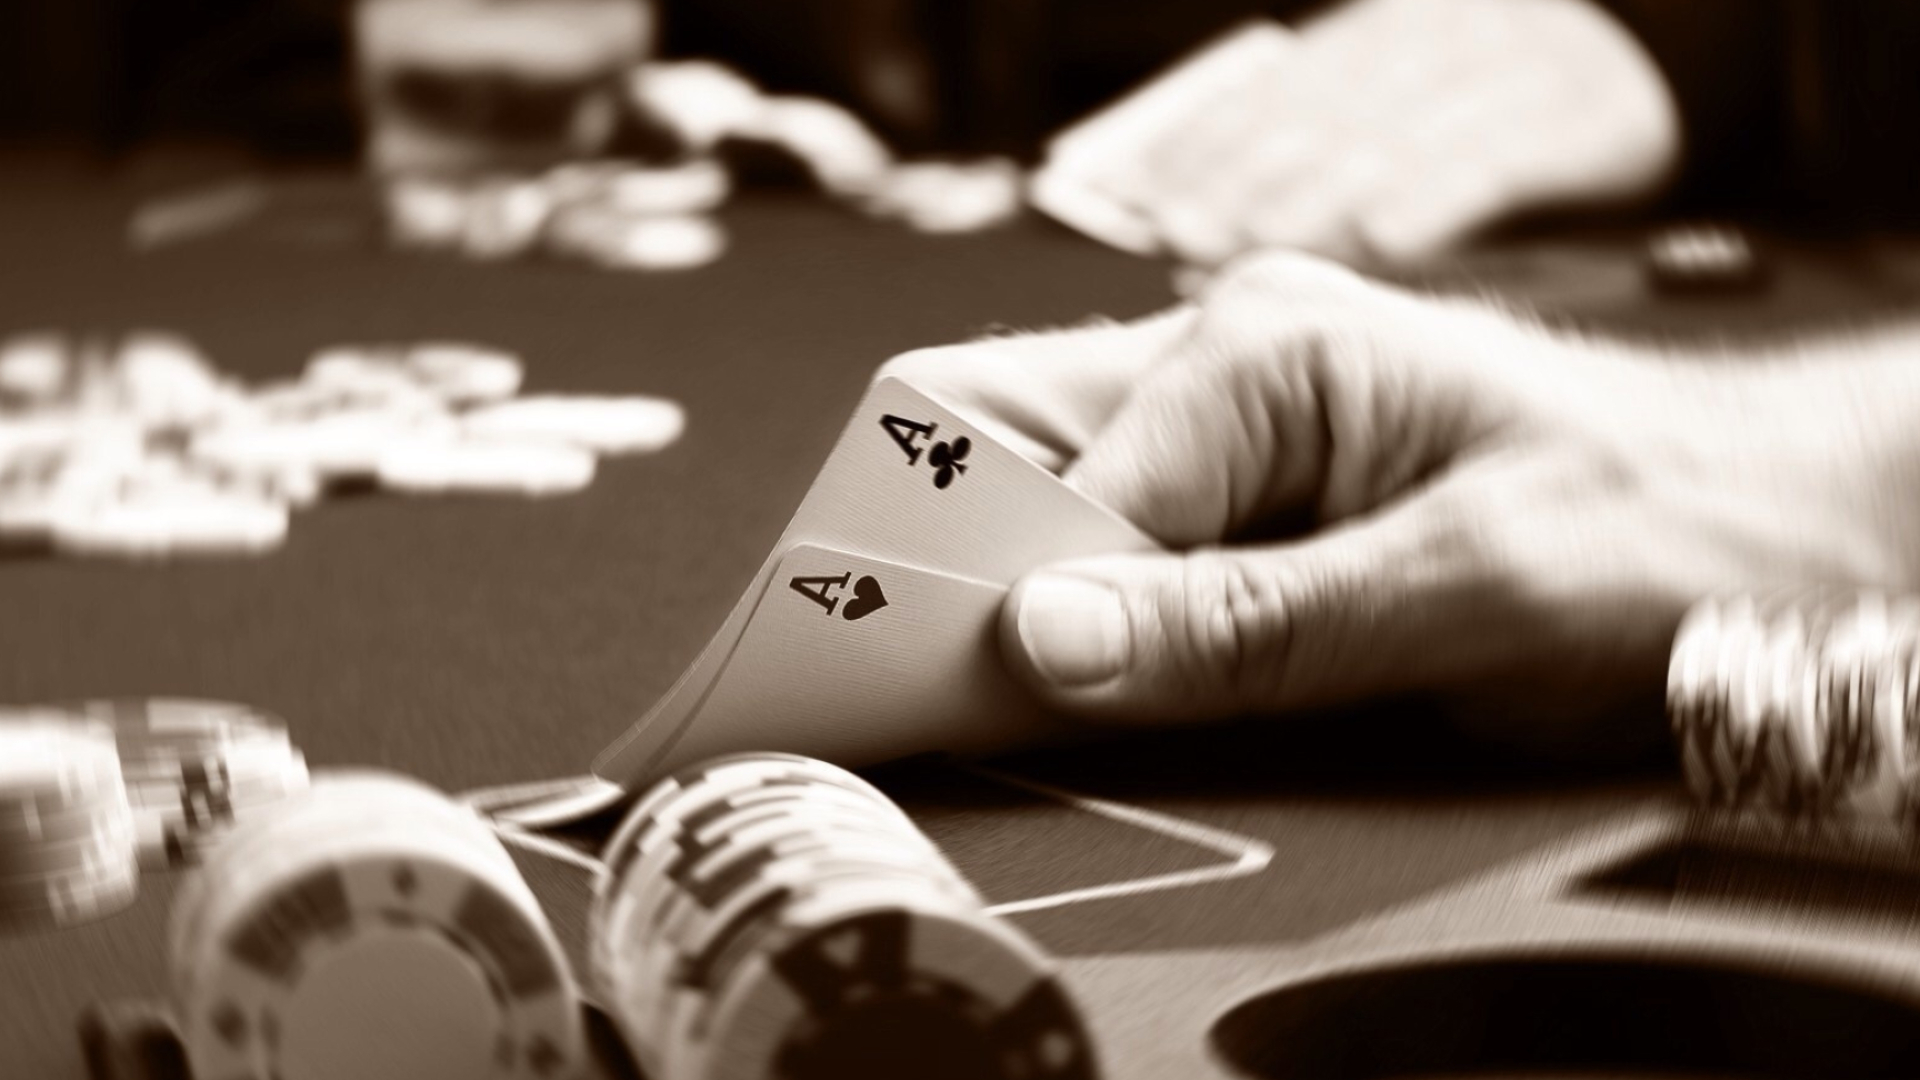 Poker: Ace-Ace, AA, Pocket aces, The best starting hand. 1920x1080 Full HD Wallpaper.